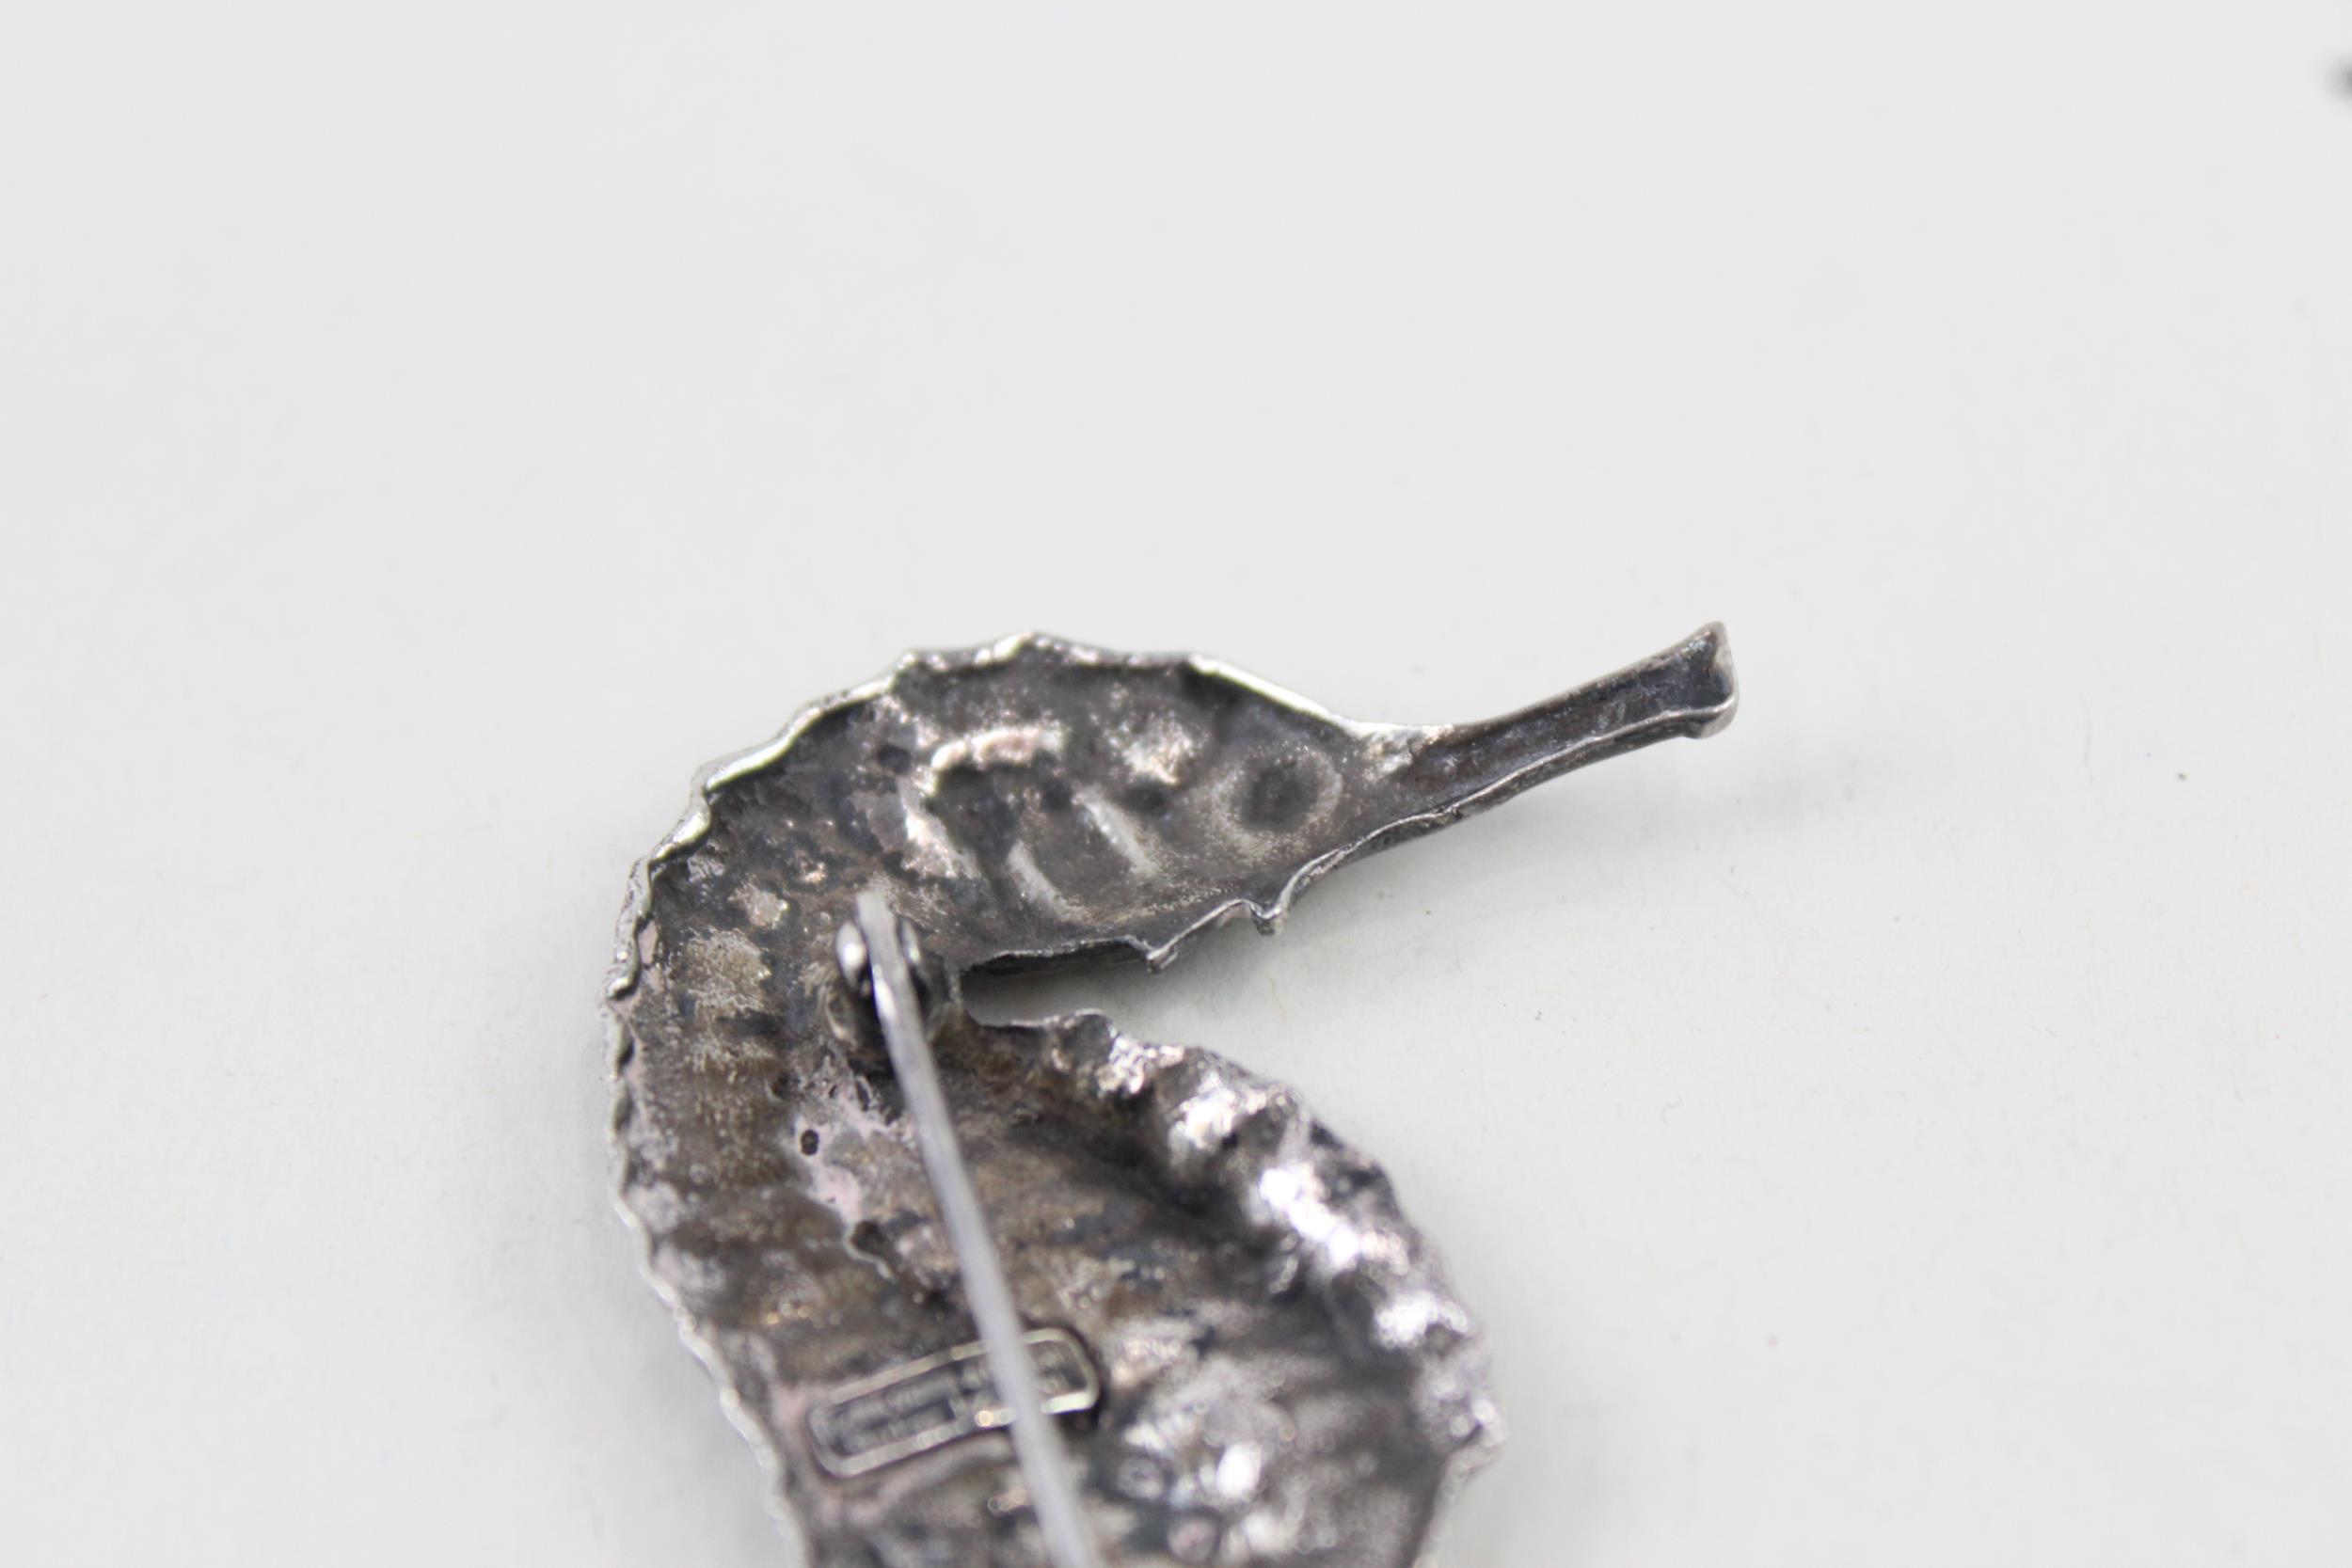 Silver seahorse brooch stamped Black, Starr & Gorham by Cini (15g) - Image 7 of 7